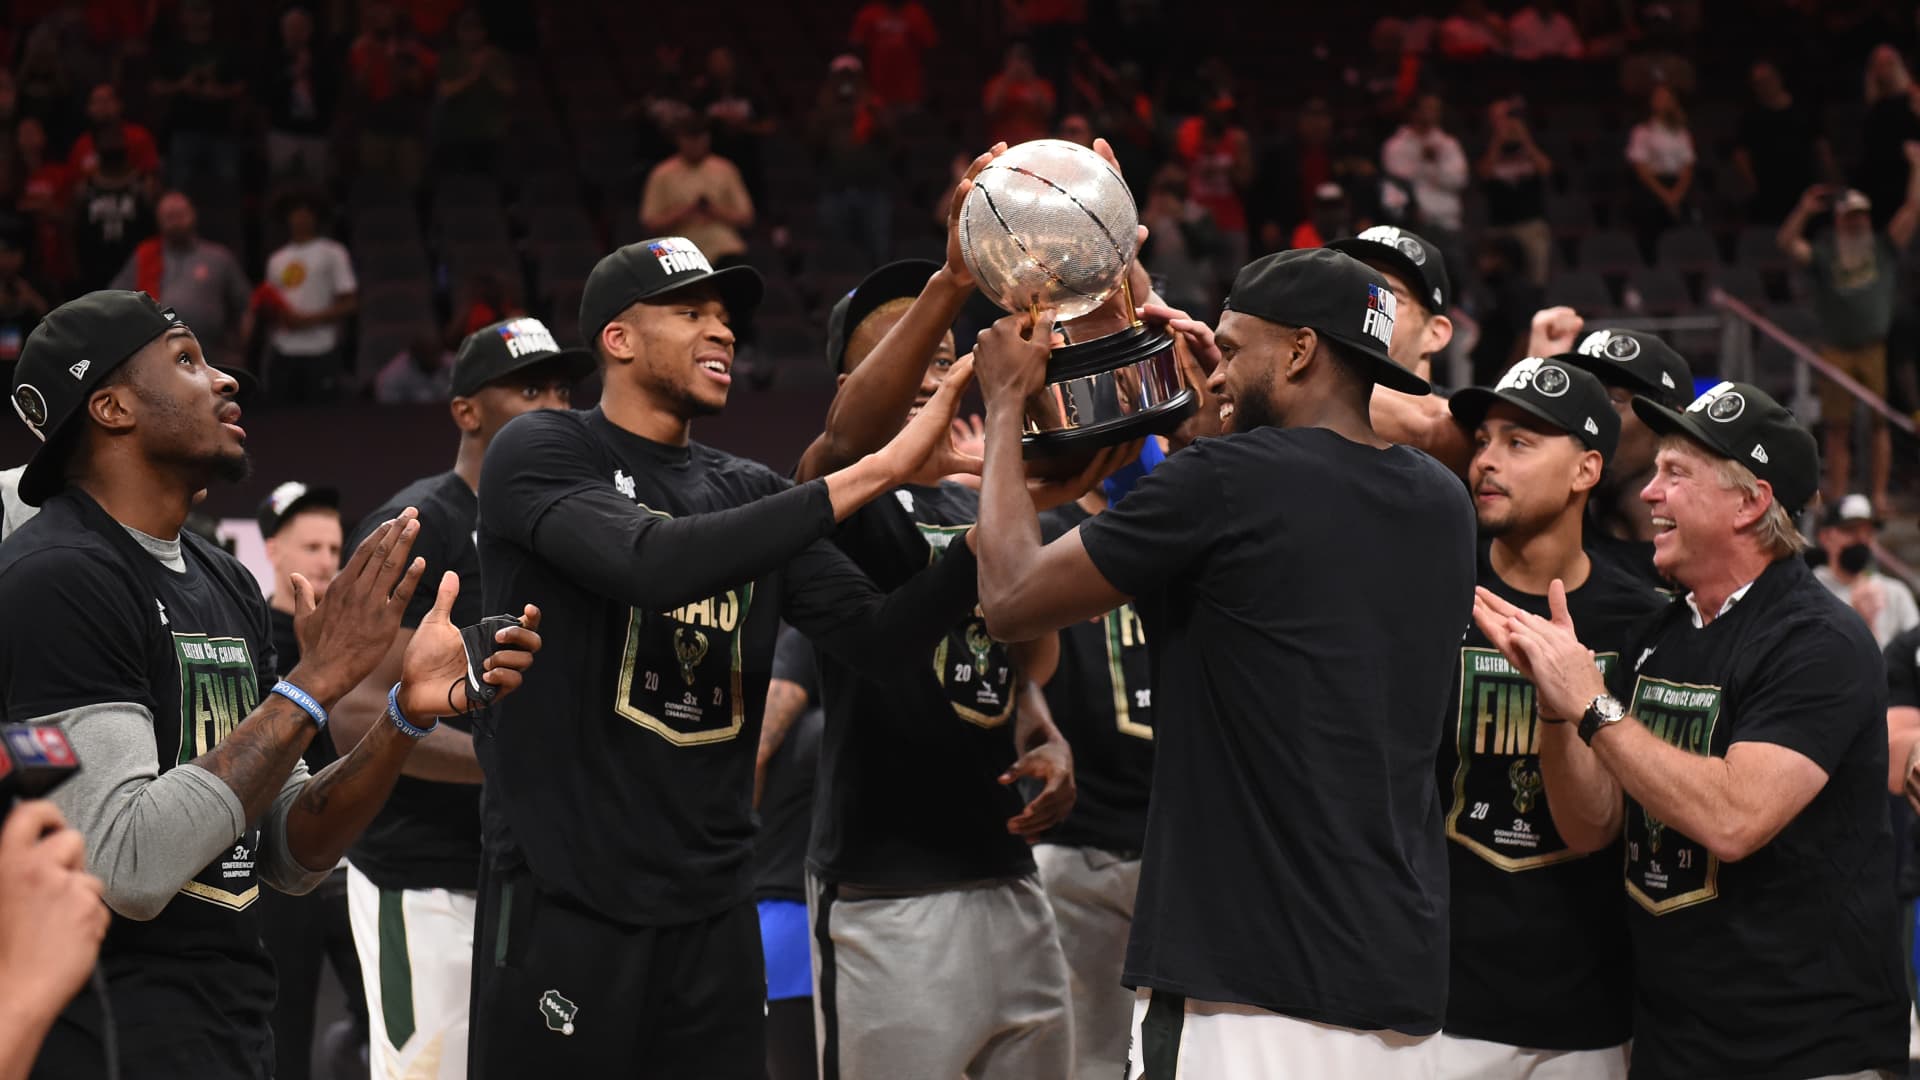 Khris Middleton #22 of the Milwaukee Bucks holds up the Eastern Conference Finals Trophy after the game against the Atlanta Hawks during Game 6 of the Eastern Conference Finals of the 2021 NBA Playoffs on July 3, 2021 at State Farm Arena in Atlanta, Georgia.